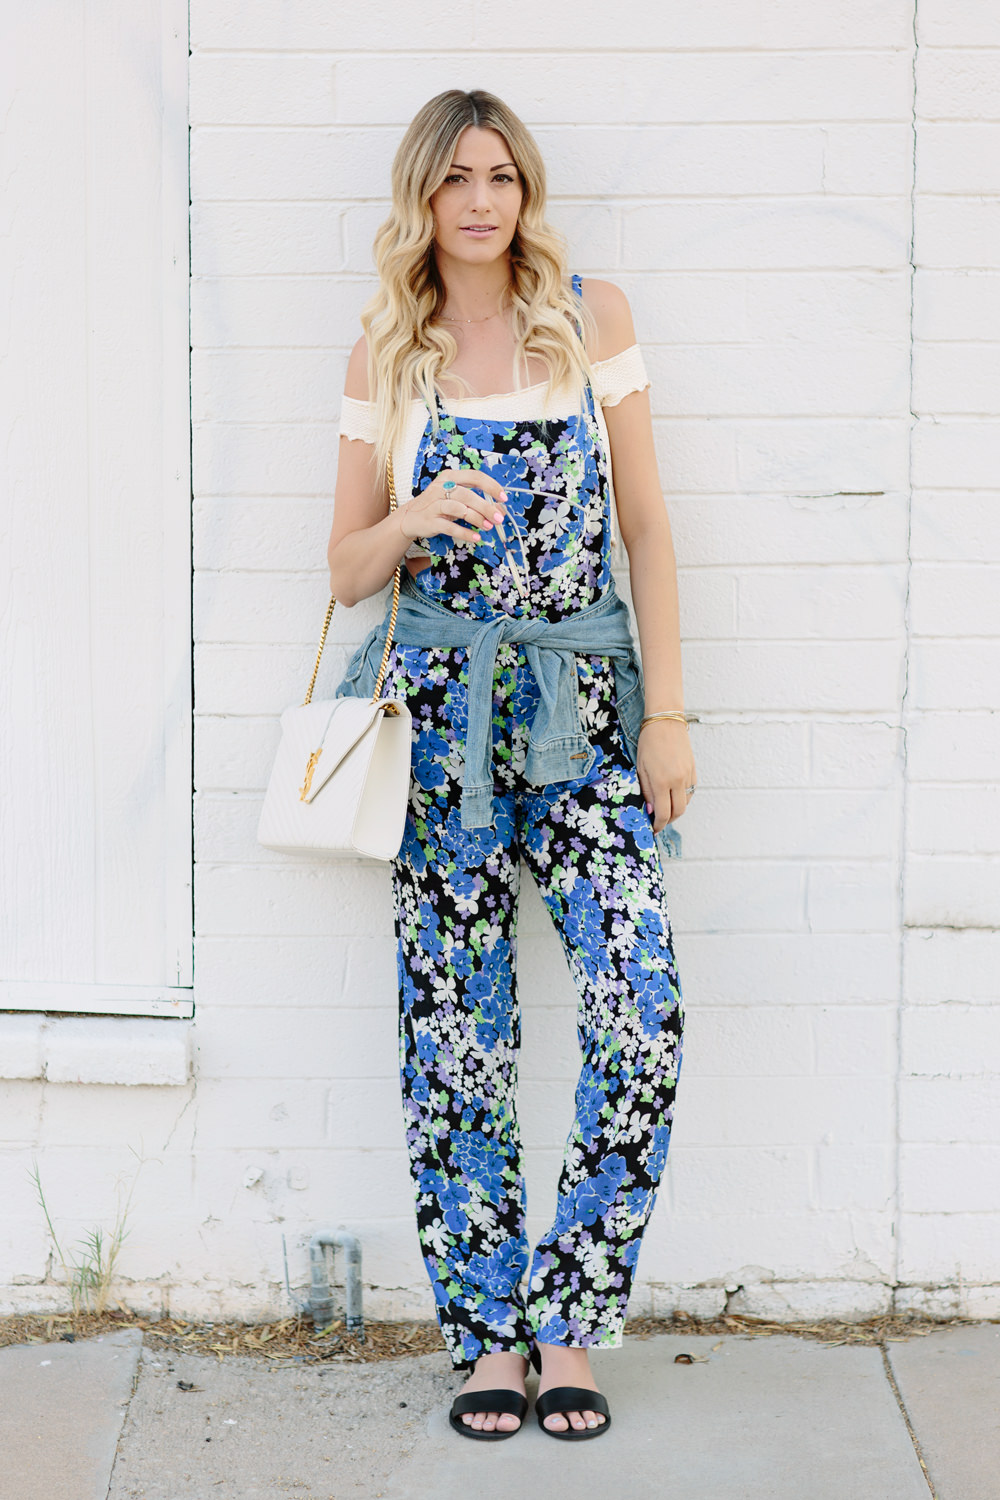 Dash of Darling styles a Wildfox blue bouquet overalls floral jumpsuit for summer with a denim jacket, ysl bag and an off the shoulder top.